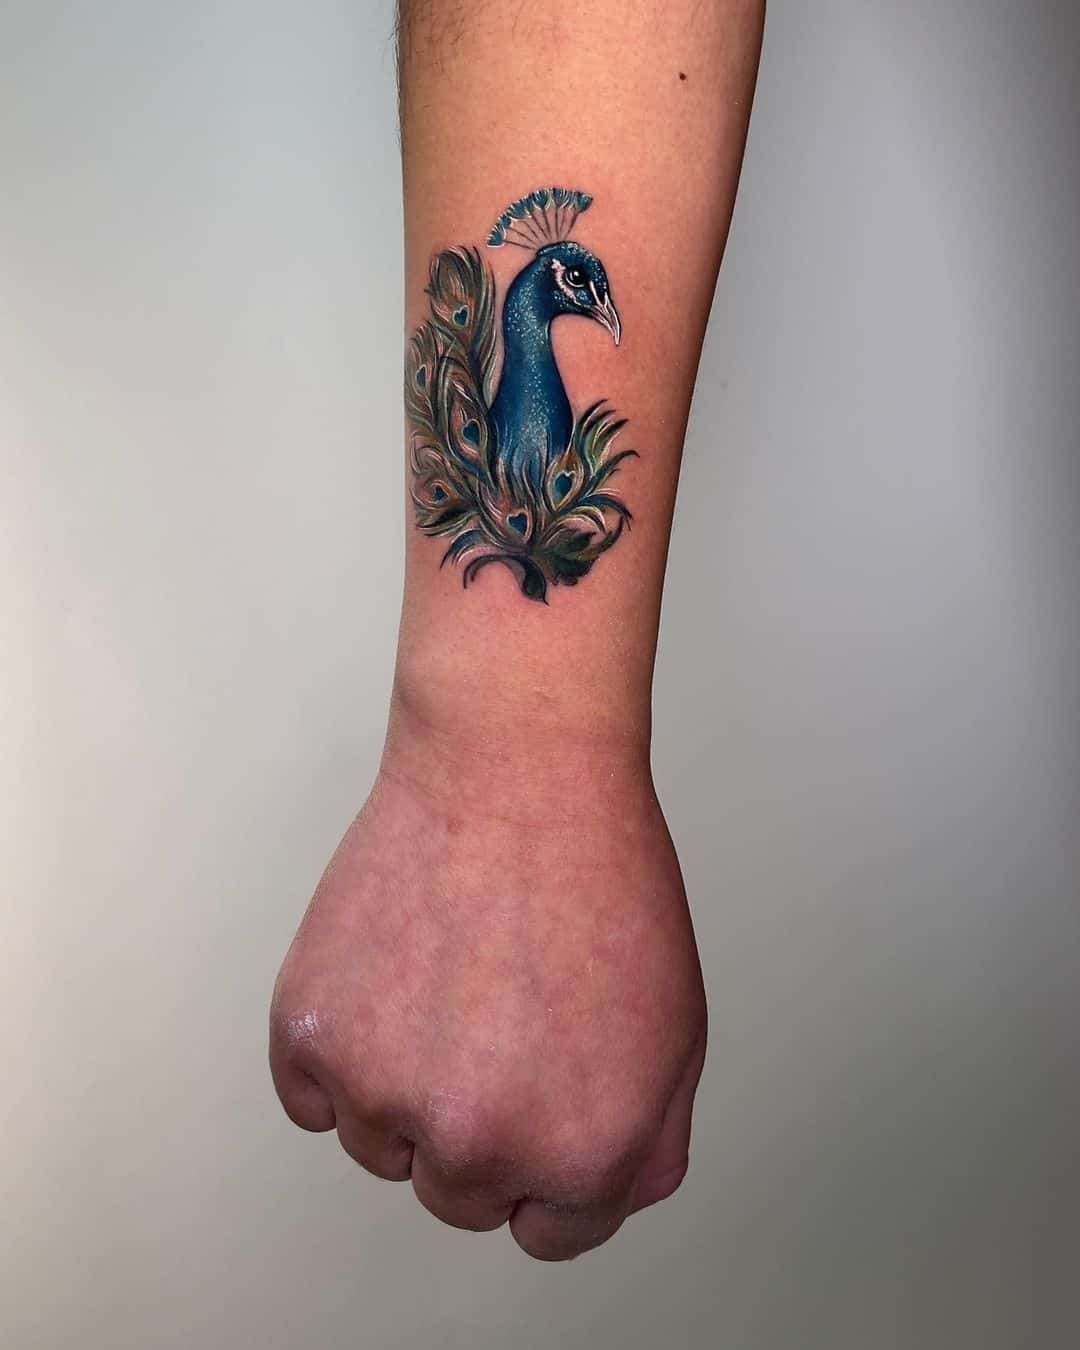 Peacock tattoo by getsytorres